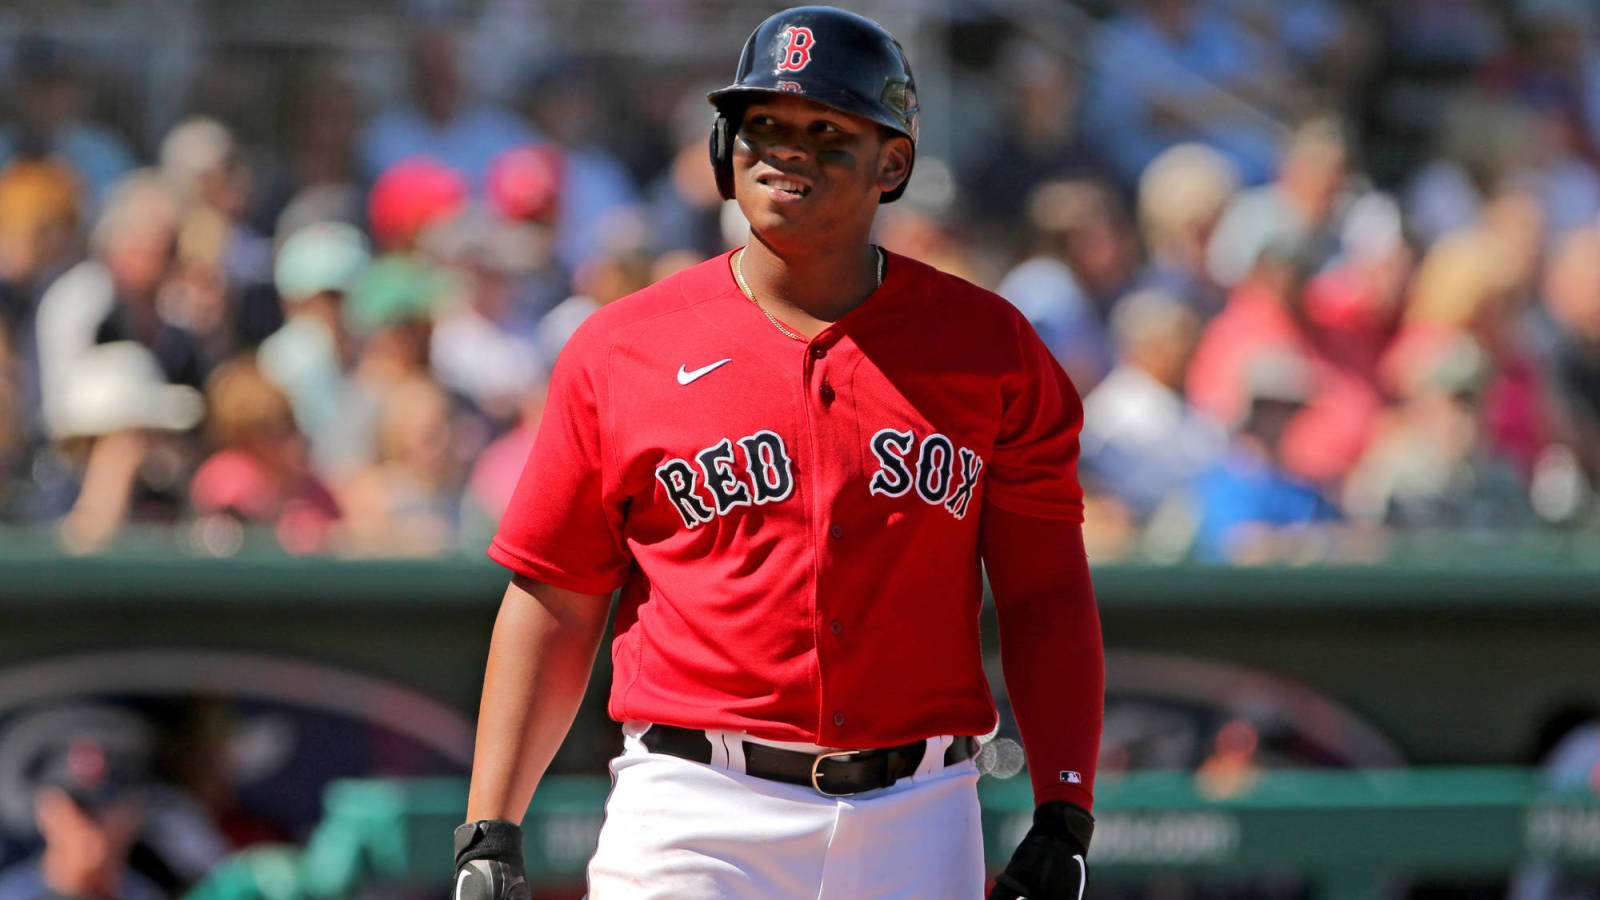 Red Sox exercising caution with Rafael Devers, others who may have